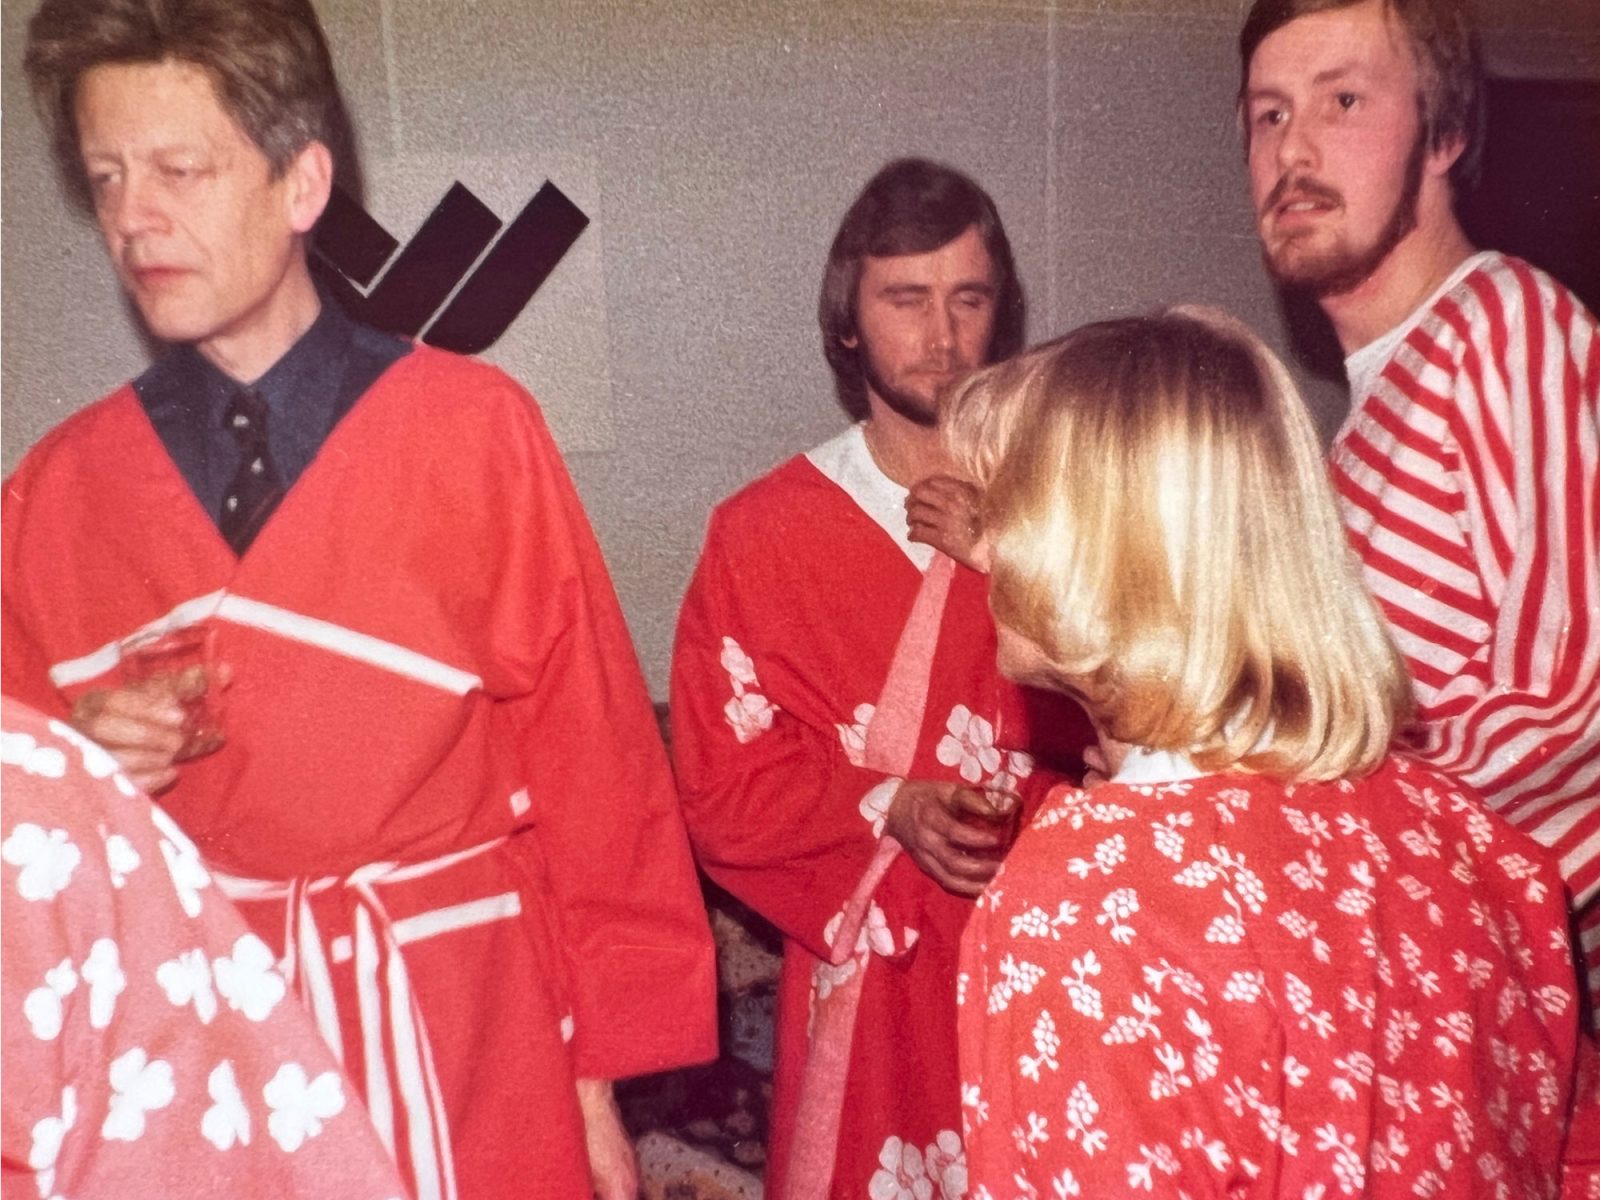 Group of men and a woman in red patterned fabric coats, holding drinks glasses.